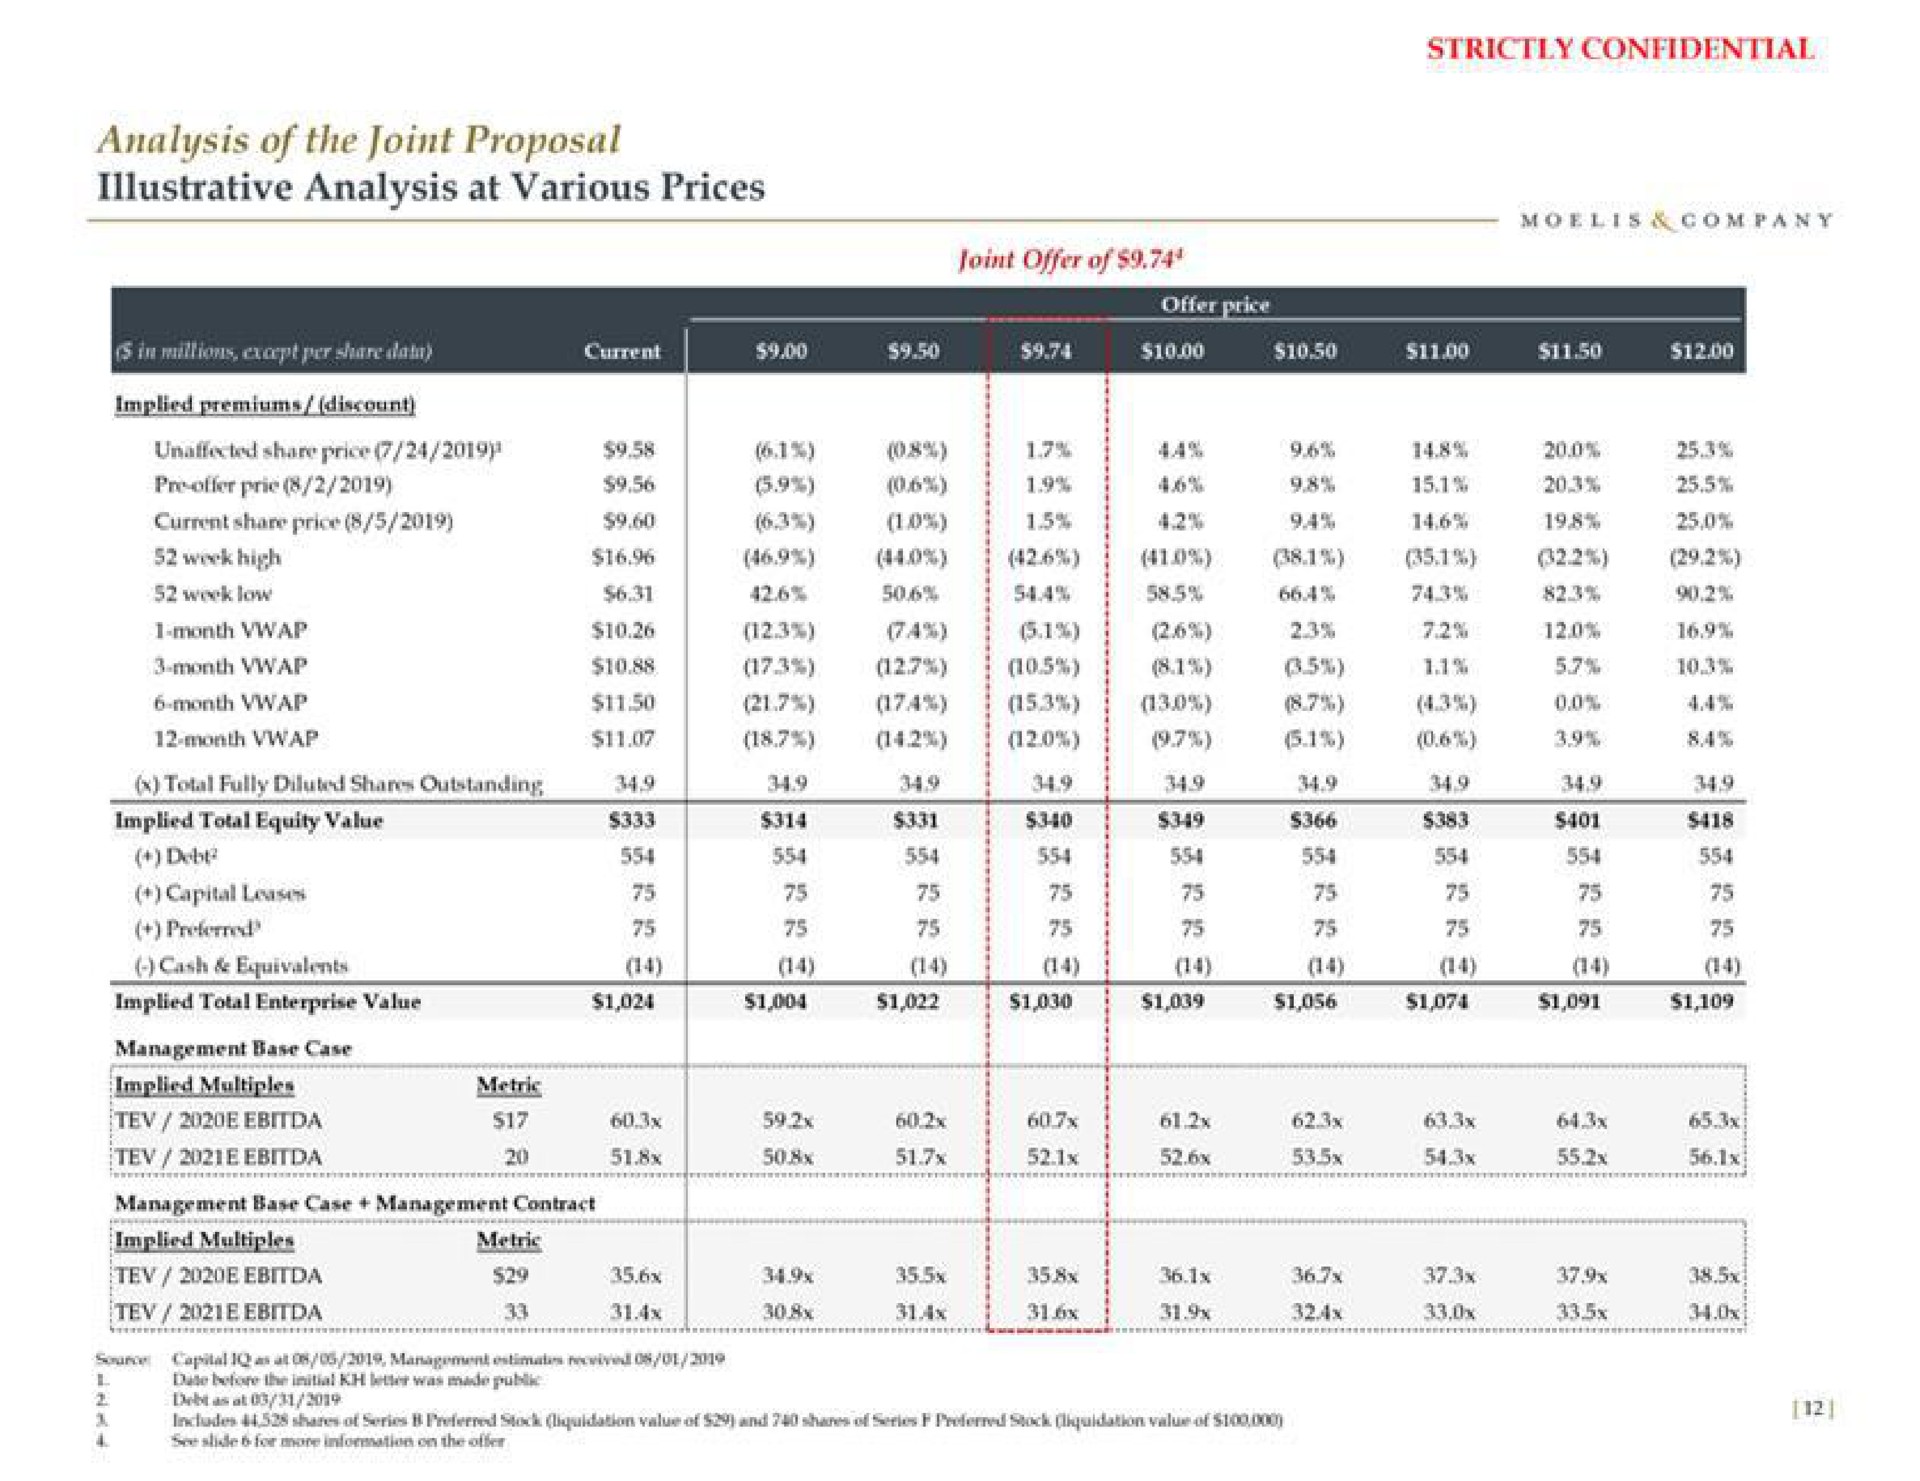 analysis of the joint proposal illustrative analysis at various prices | Moelis & Company